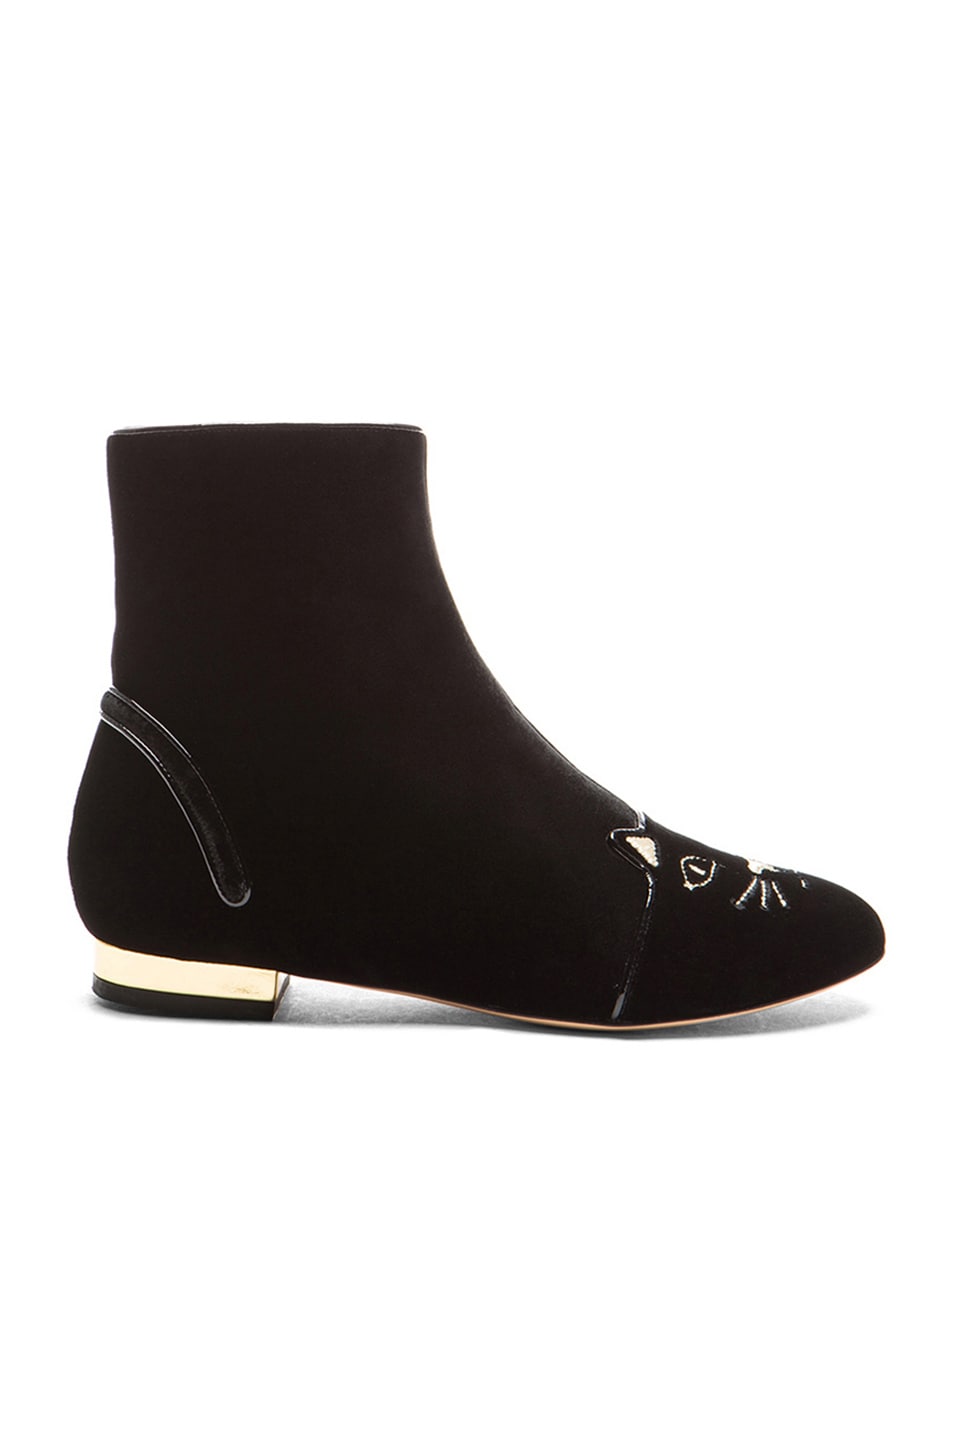 Image 1 of Charlotte Olympia Puss in Boots Velvet Booties in Black